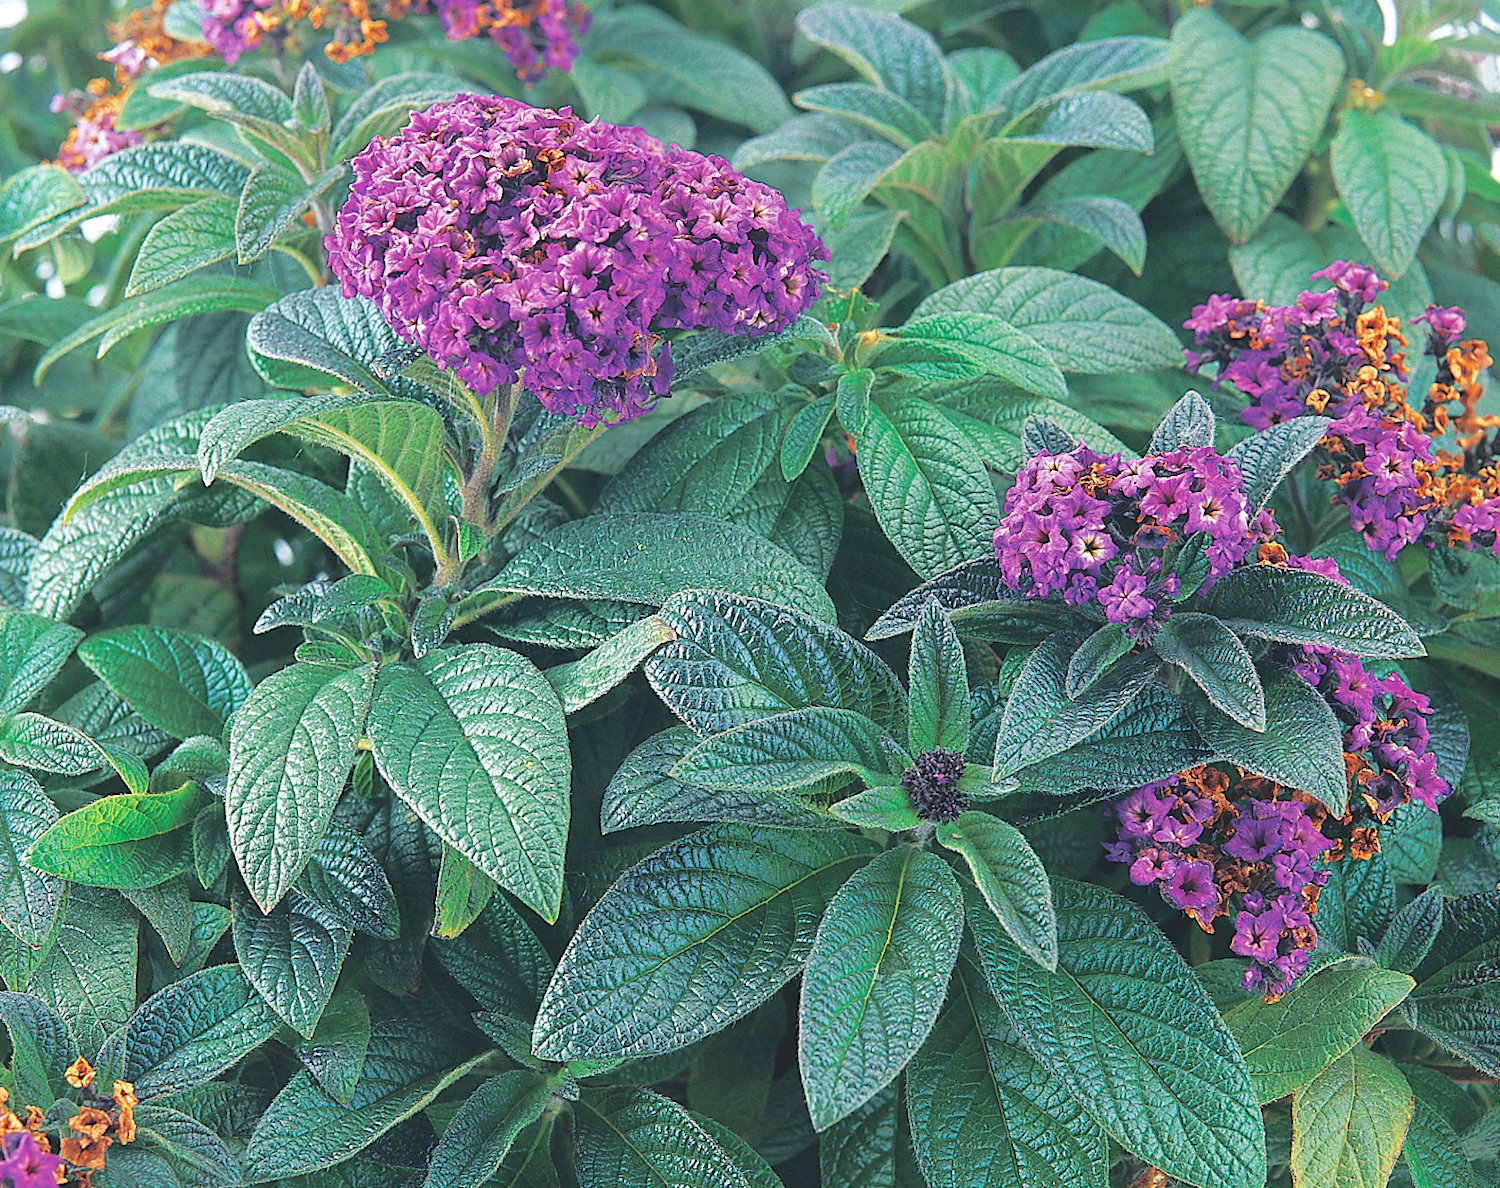 Sweetly scented heliotrope — Although available today in several colors, the dark purple variety was the cottage garden classic familiar in Thornton Wilder’s time.